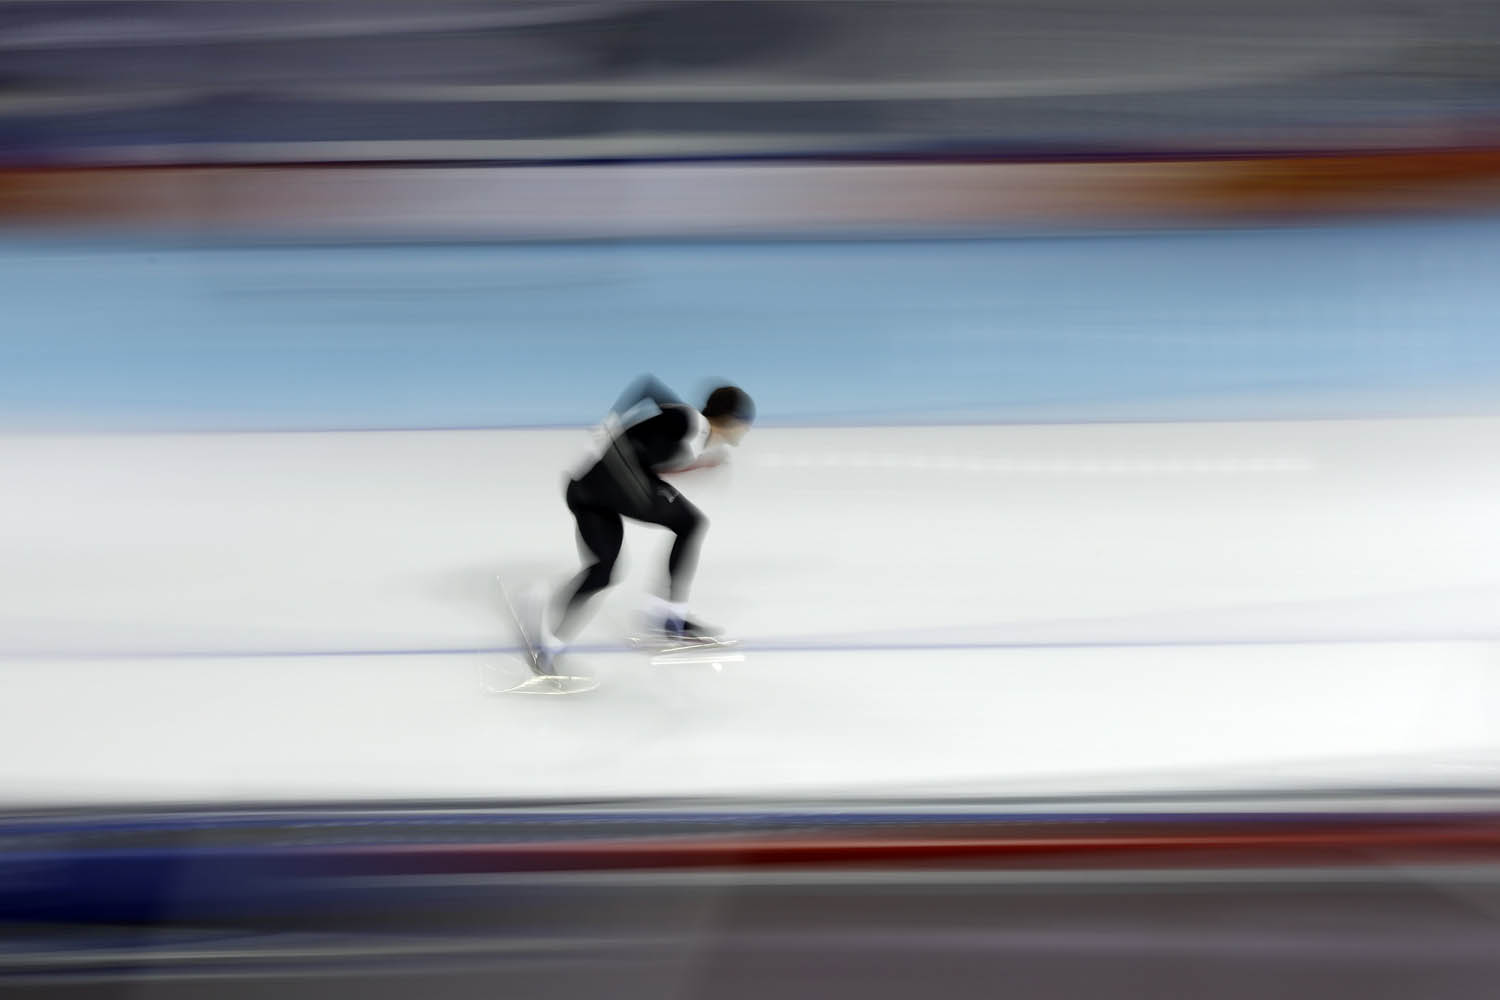 Feb. 6, 2014. A speedskater trains at the Adler Arena Skating Center during the 2014 Winter Olympics in Sochi, Russia.